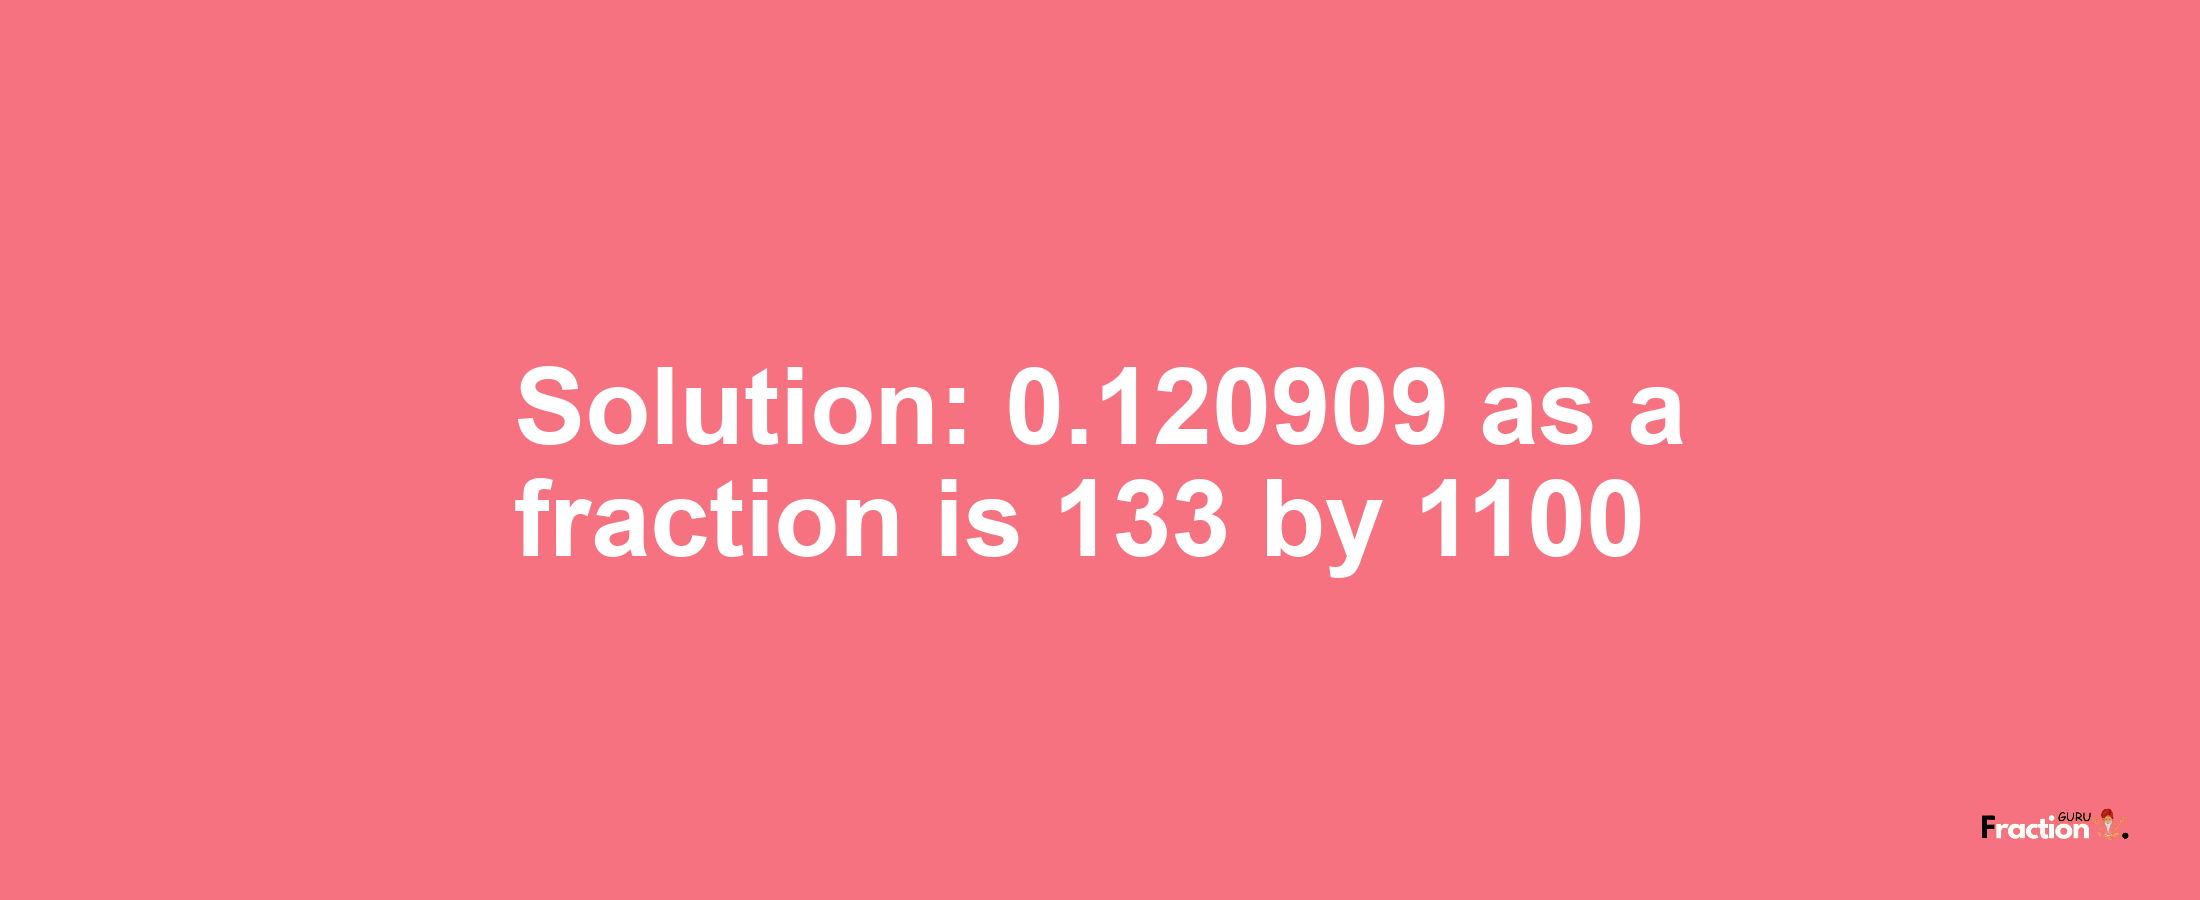 Solution:0.120909 as a fraction is 133/1100